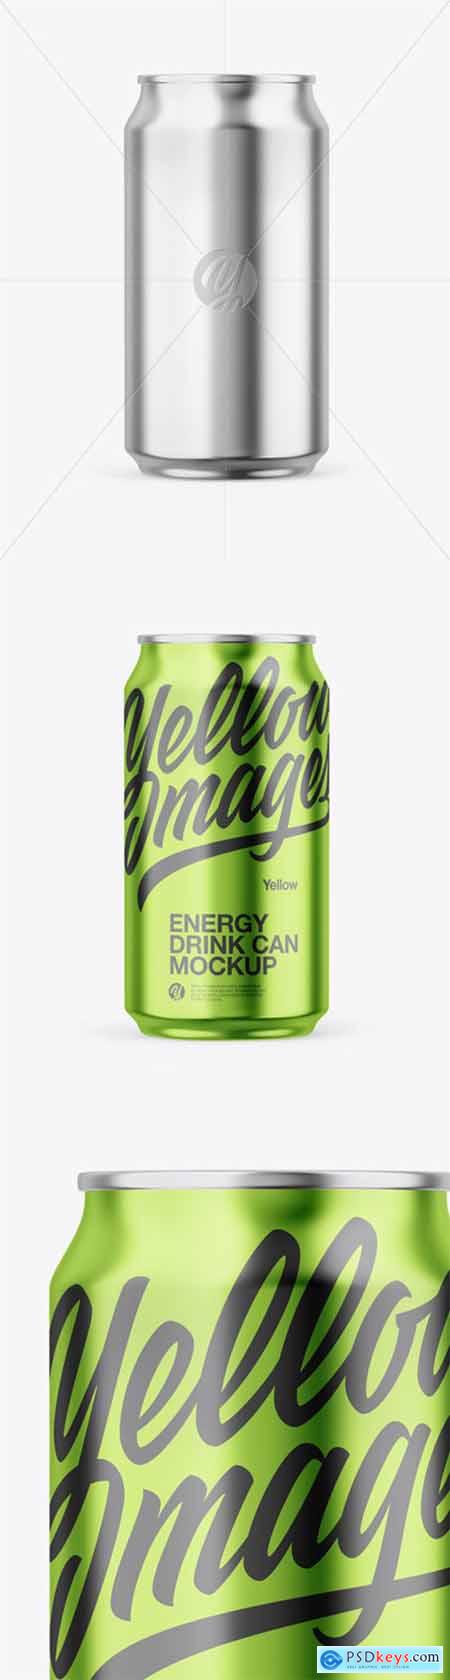 Download Glossy Metallic Can Mockup 55441 Free Download Photoshop Vector Stock Image Via Torrent Zippyshare From Psdkeys Com